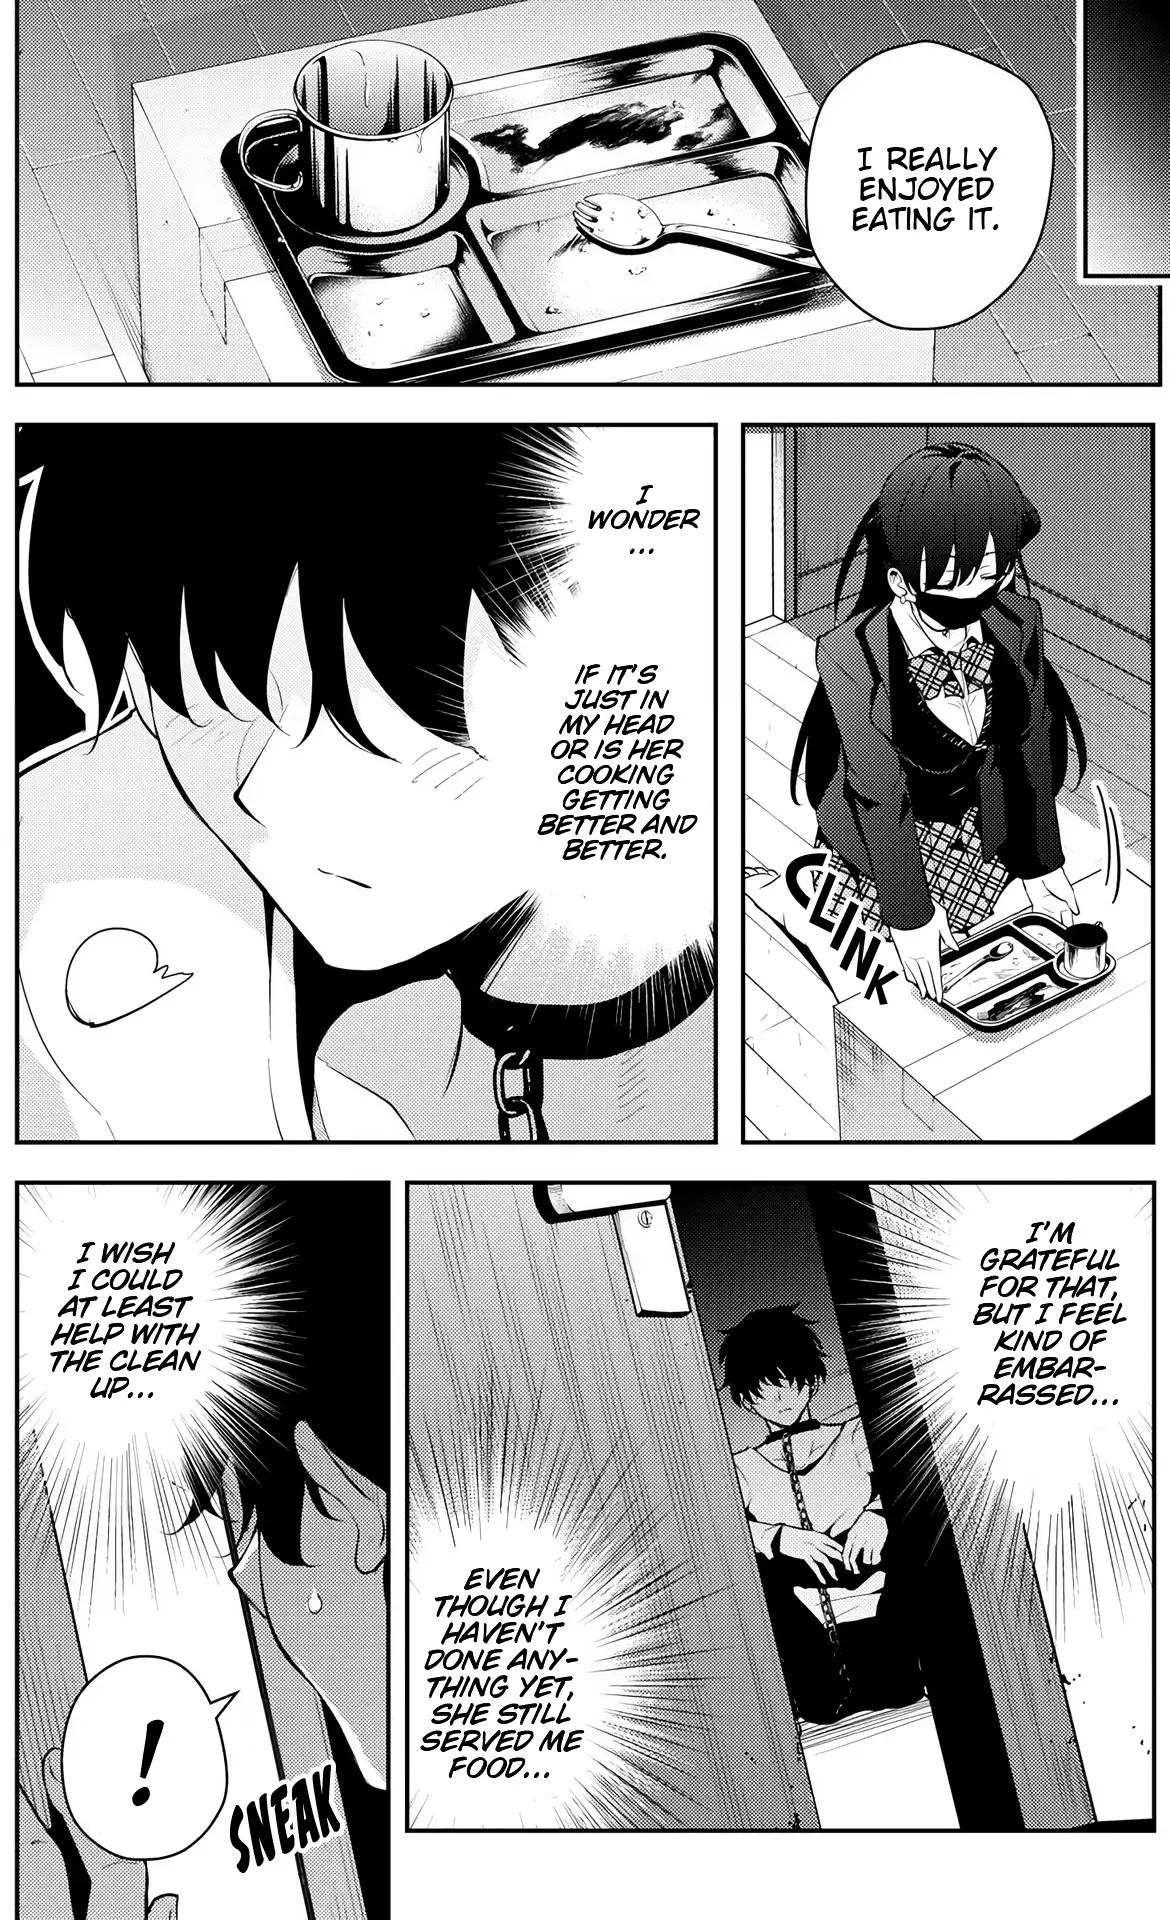 The Story Of A Manga Artist Confined By A Strange High School Girl - 11 page 1-e34d36ee